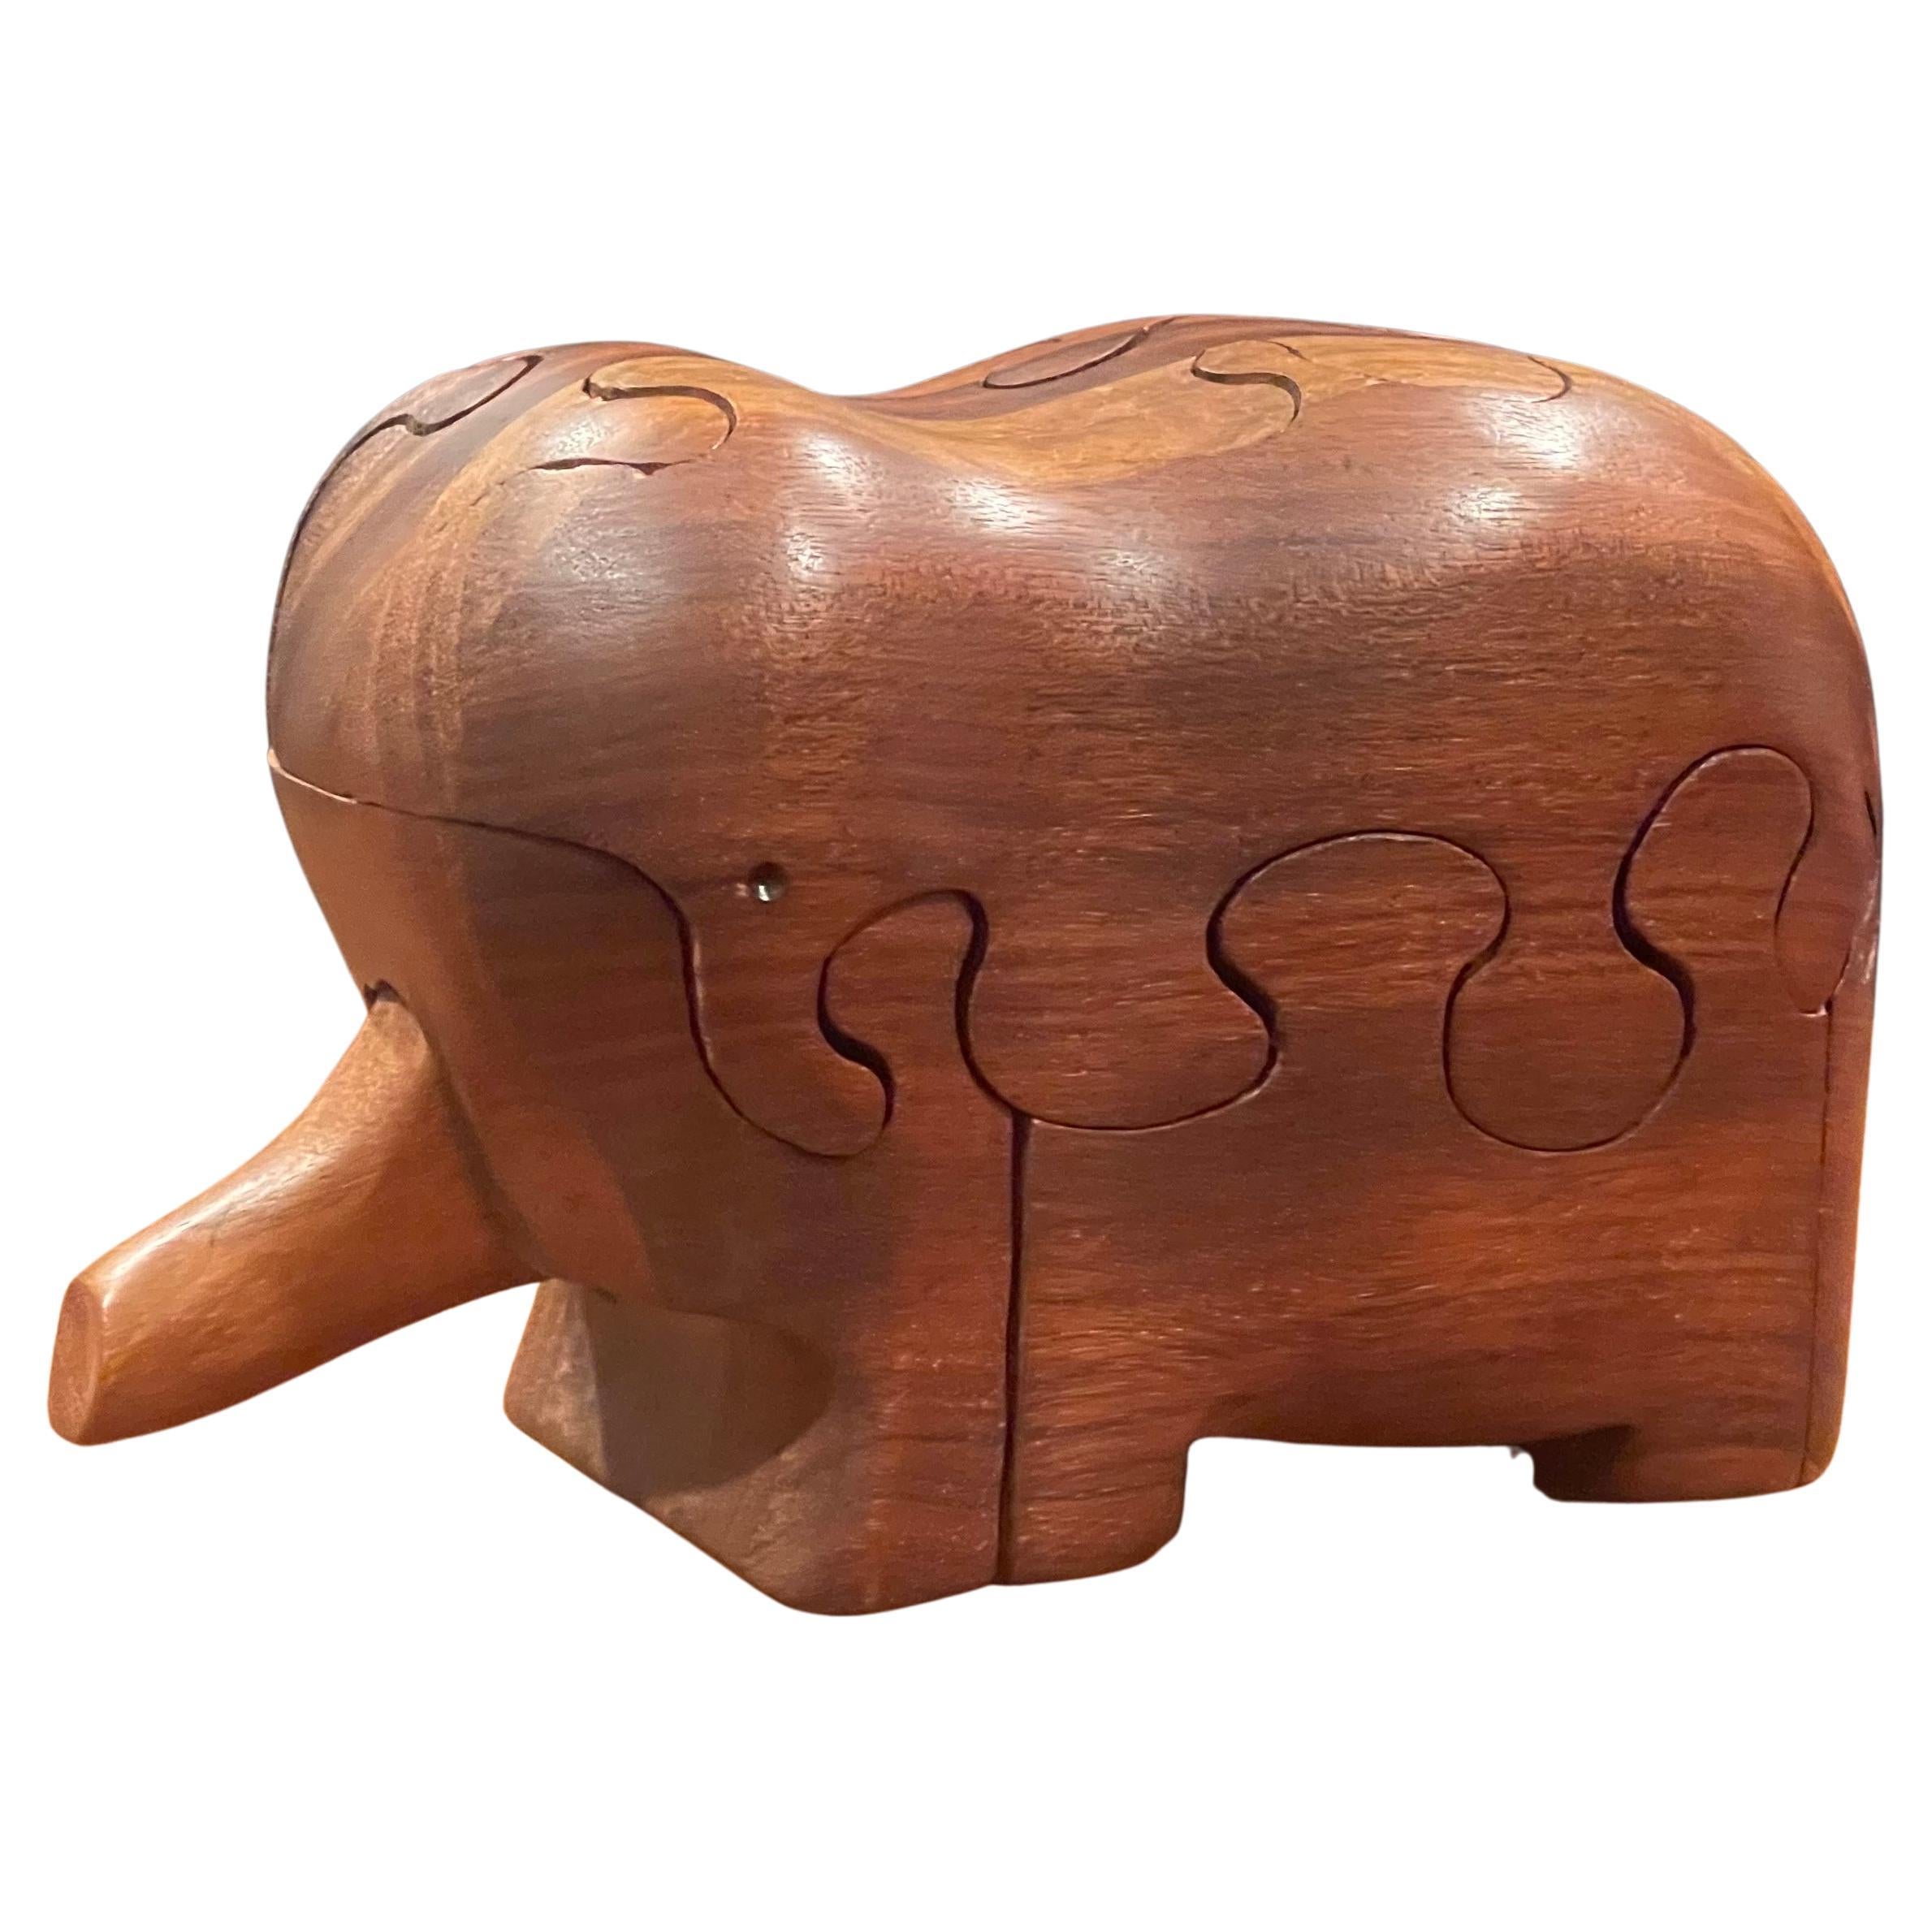 Incredible craftsmanship on this very hard to find solid staved walnut elephant puzzle / paperweight / sculpture designed and handcrafted by artist Deborah Bump, circa 1978. The piece is in very good vintage condition (with the exception of a small